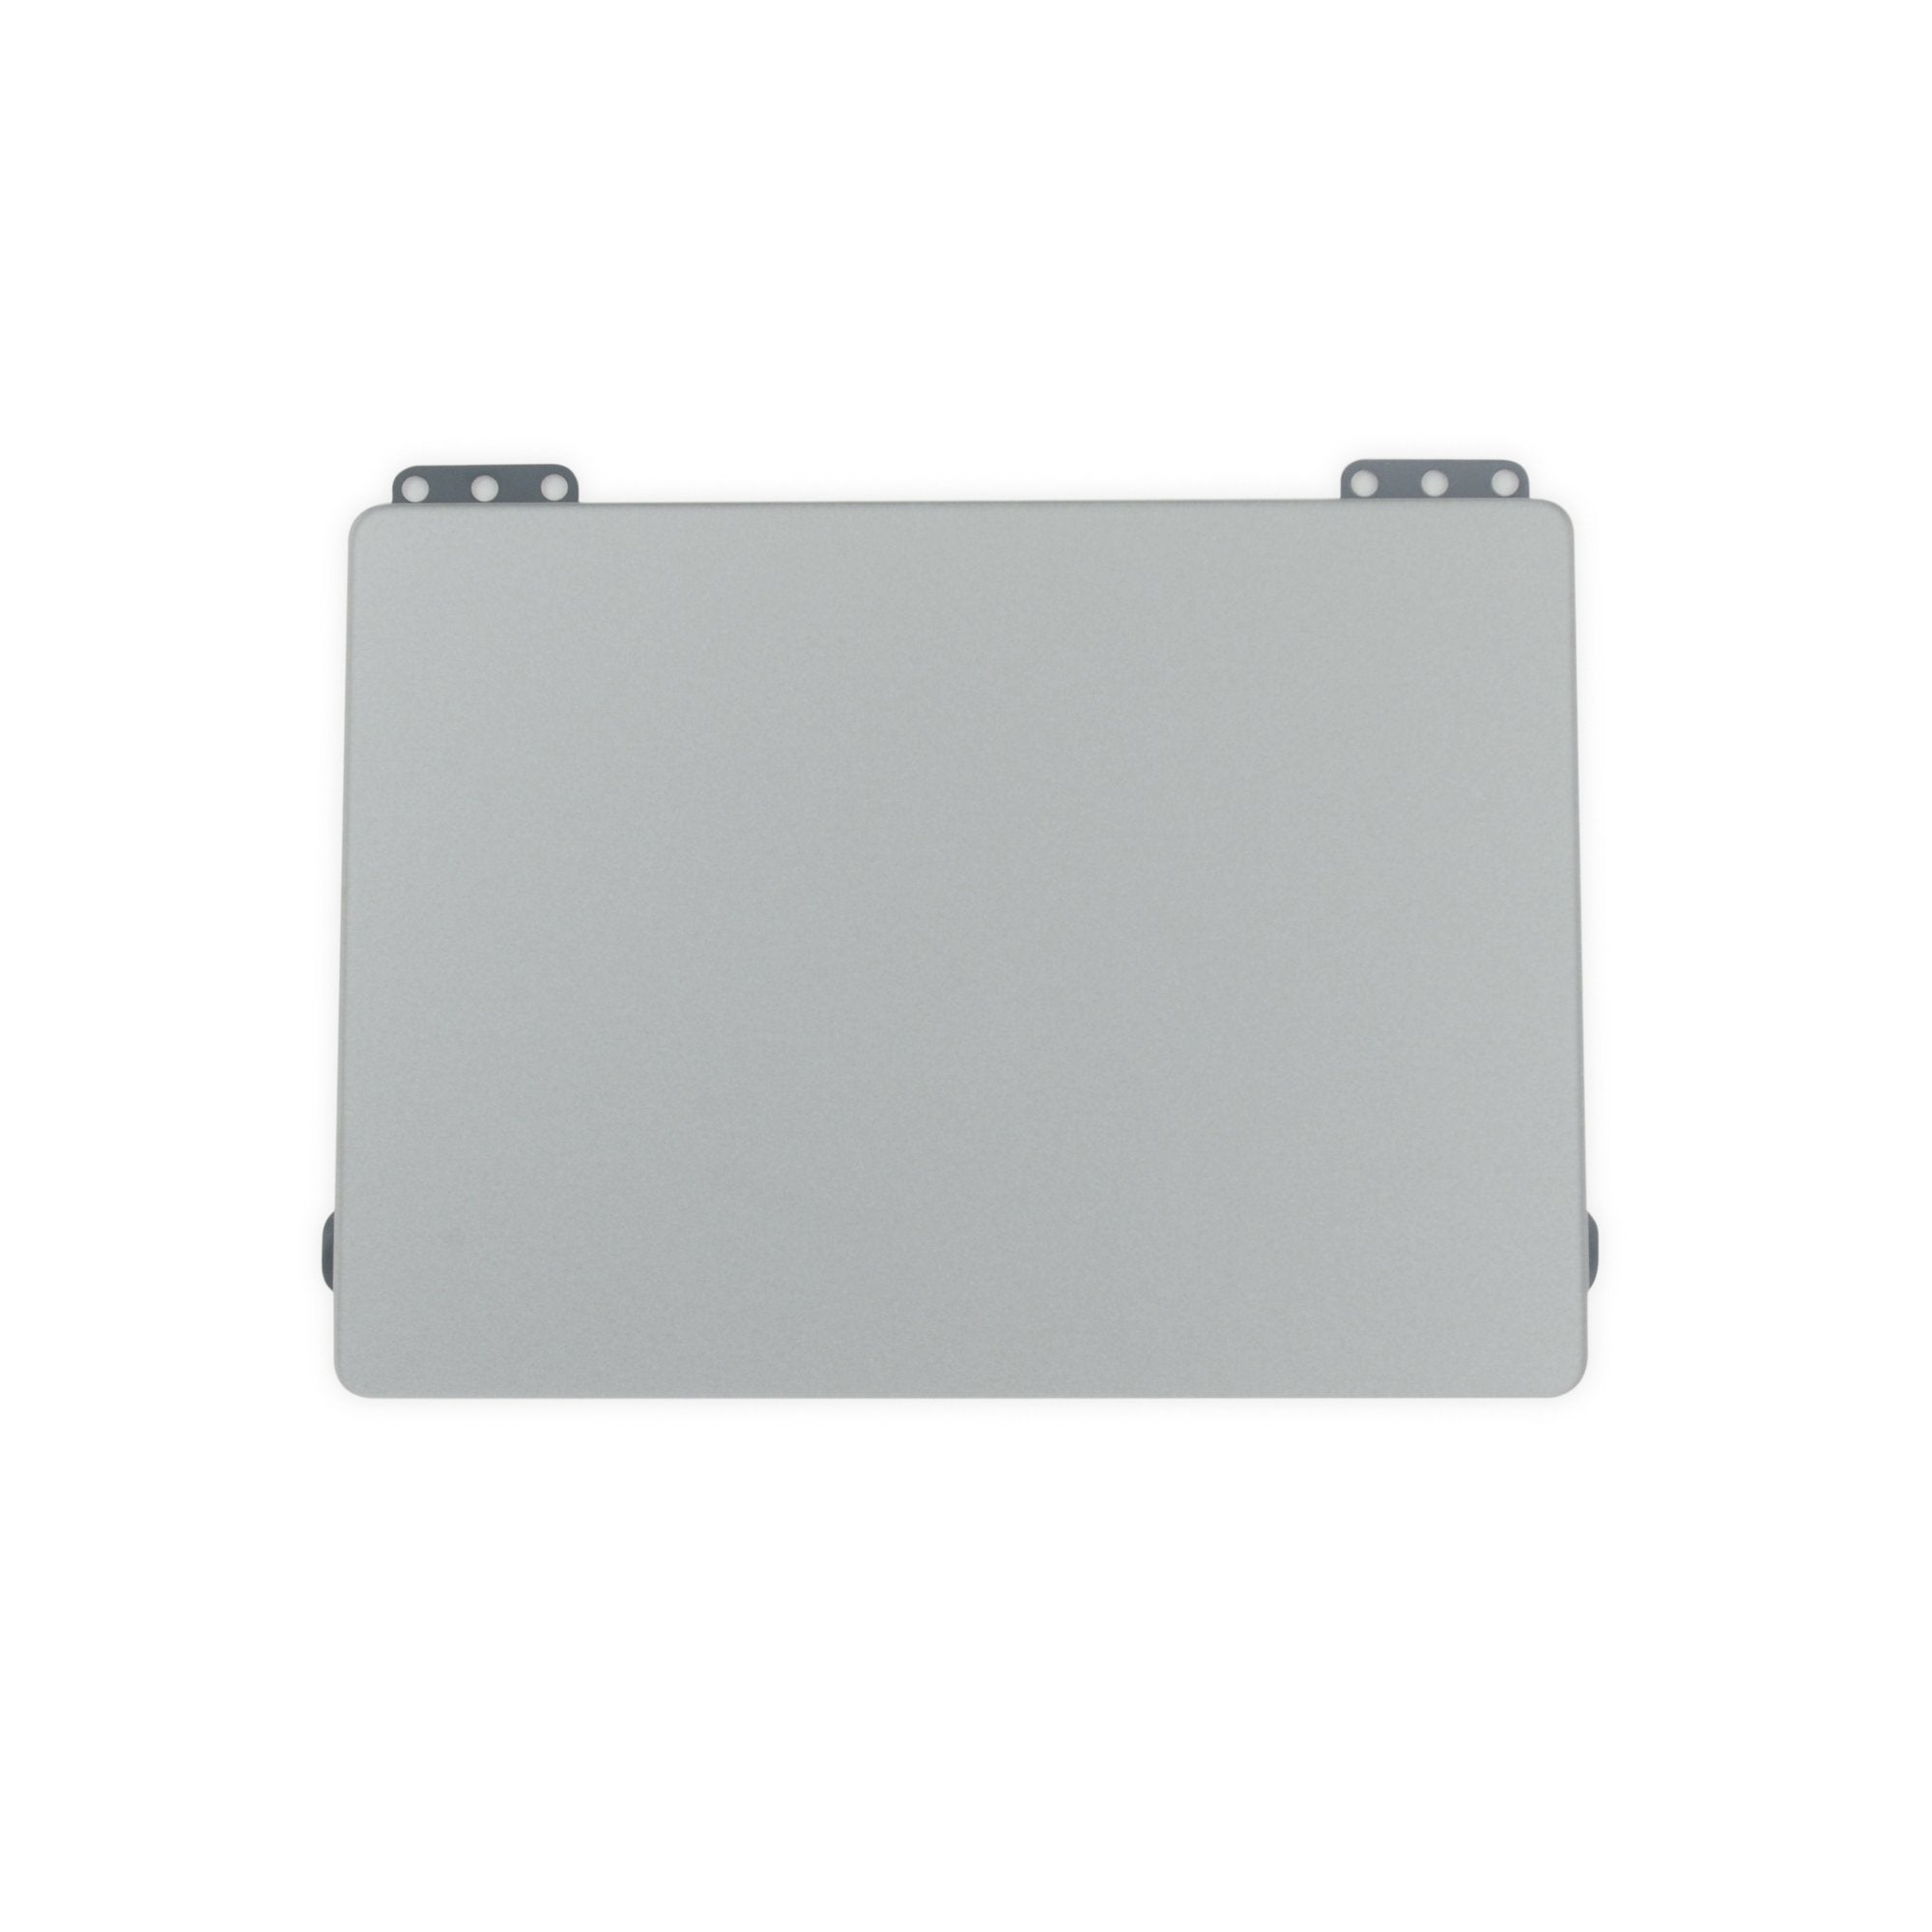 MacBook Air 13" (Mid 2011) Trackpad Used Without Bracket